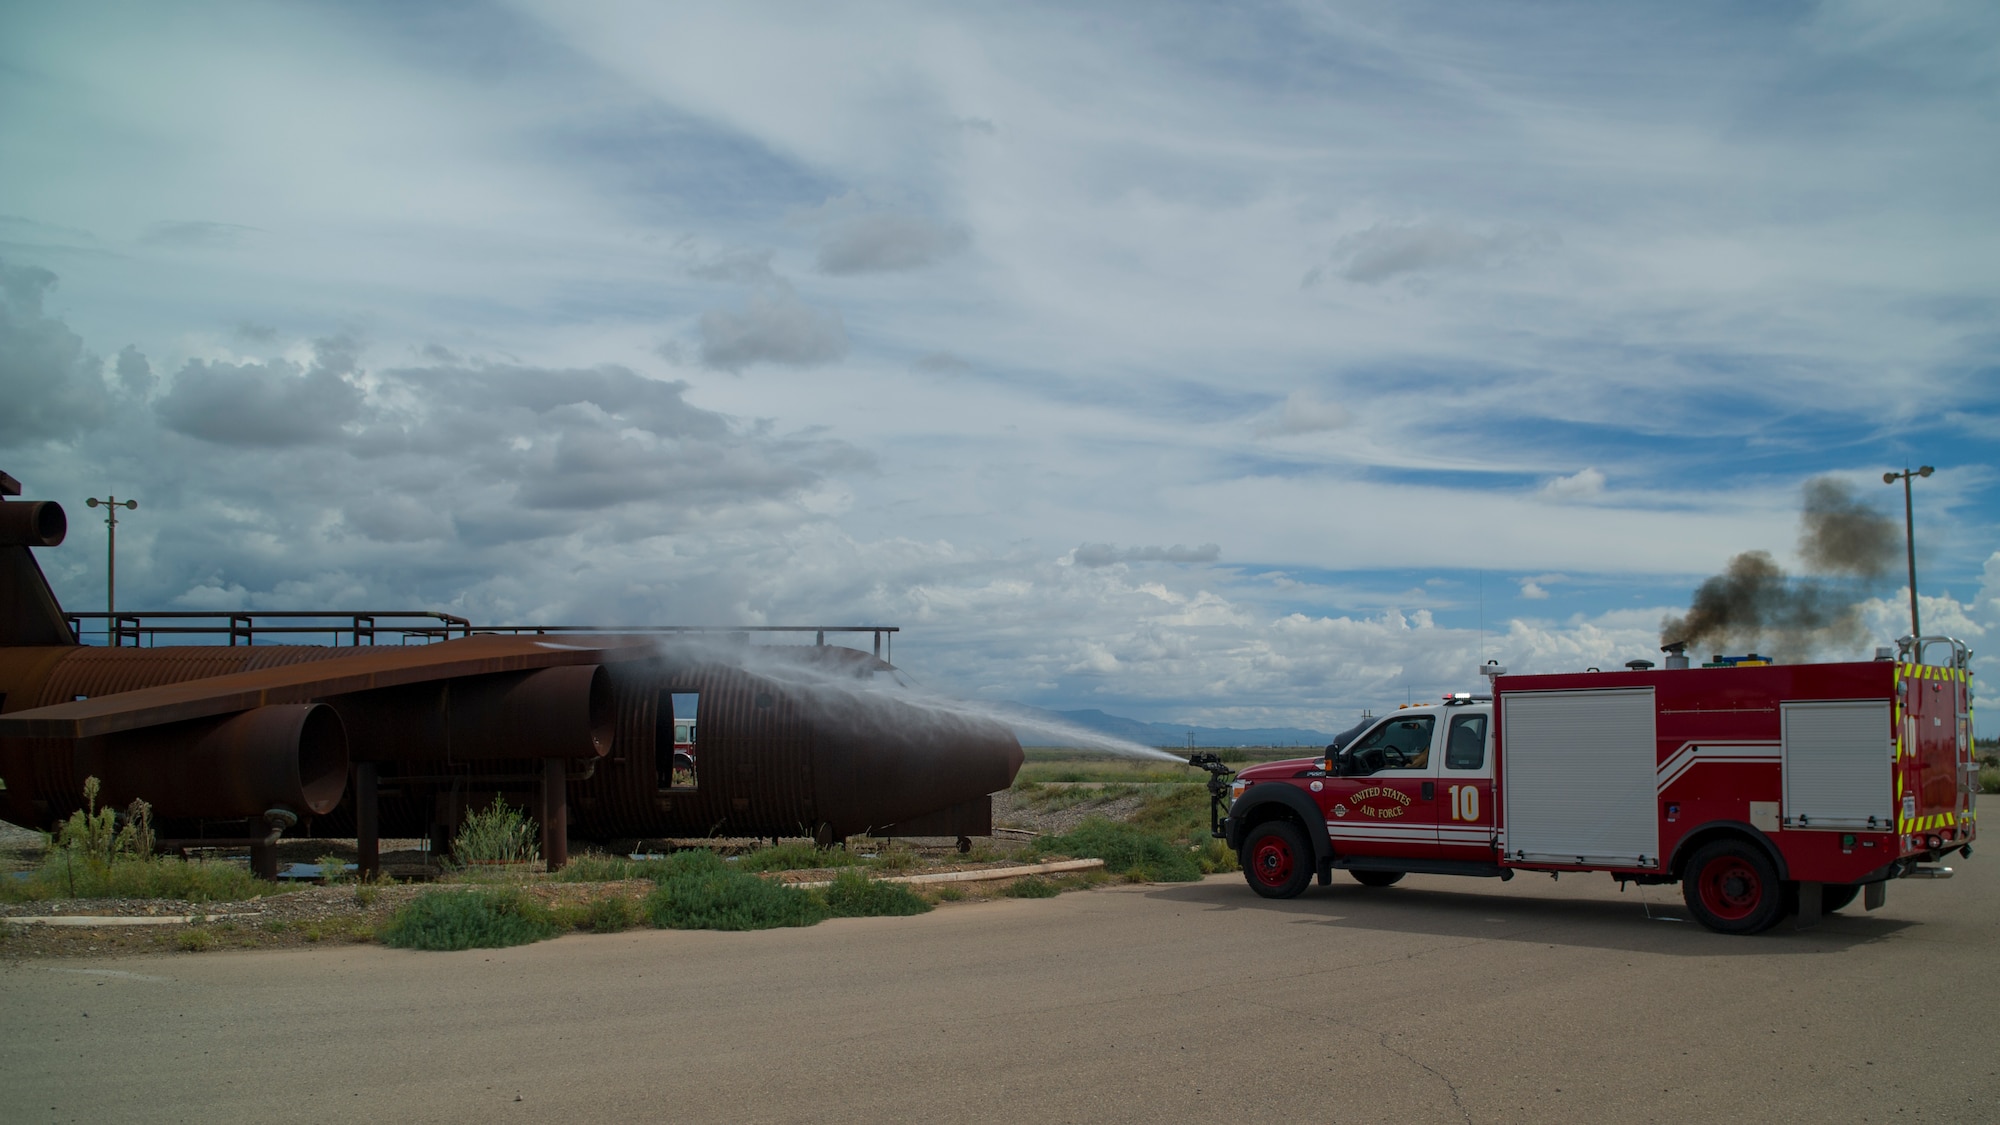 Members of the 49th Civil Engineer Squadron Fire Protection Flight perform an exercise highlighting the capabilities of their new P-34 Rapid Intervention Vehicle at Holloman Air Force Base, N.M., Sept. 21, 2014..  (U.S. Air Force photo by Airman 1st Class Aaron Montoya) 